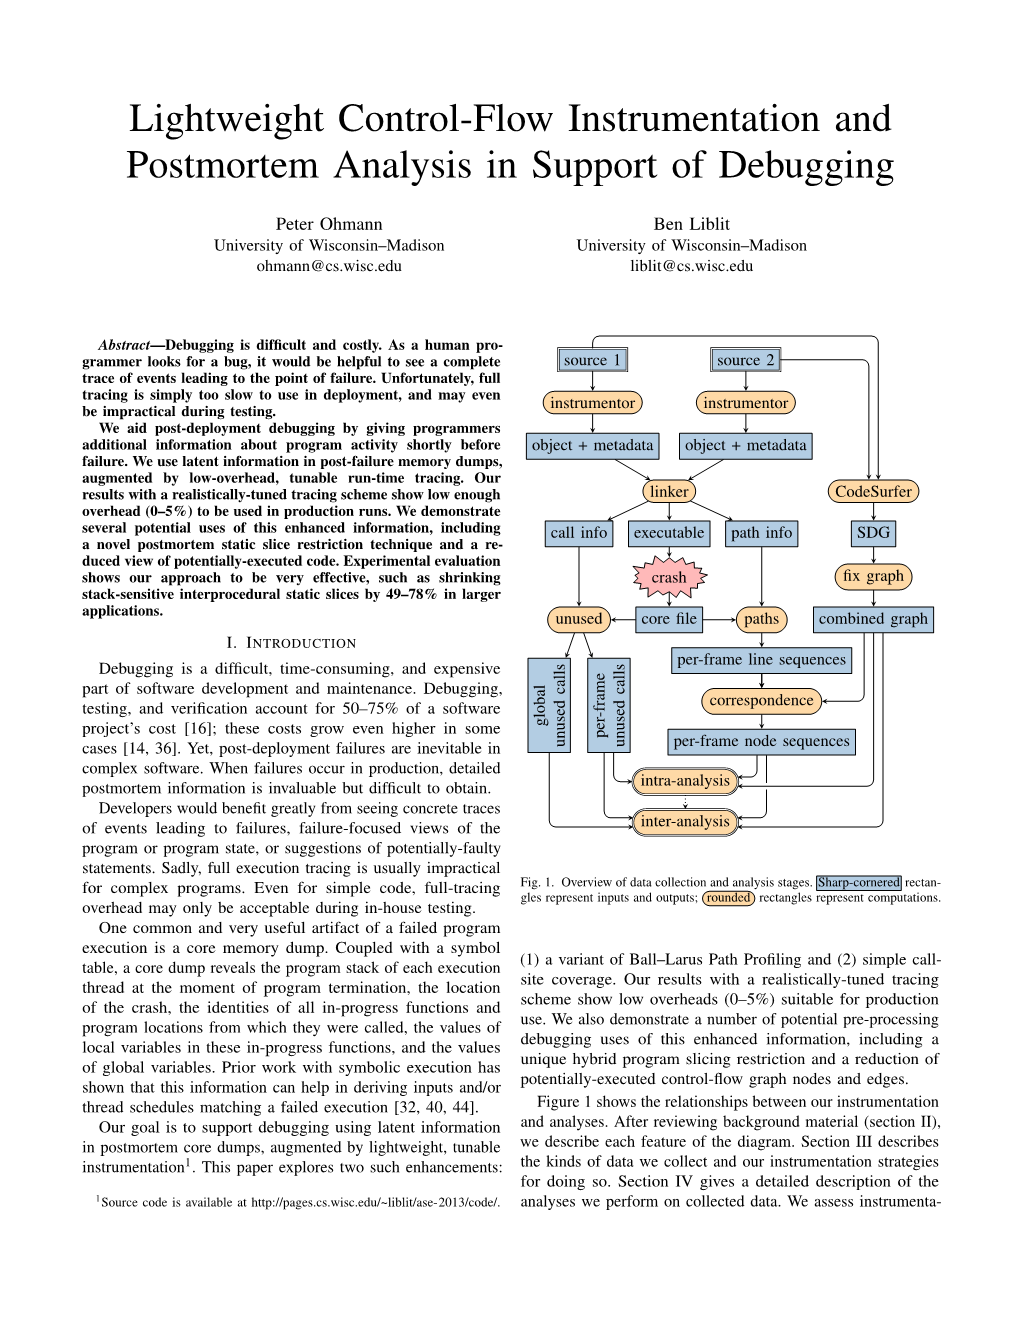 Lightweight Control-Flow Instrumentation and Postmortem Analysis in Support of Debugging